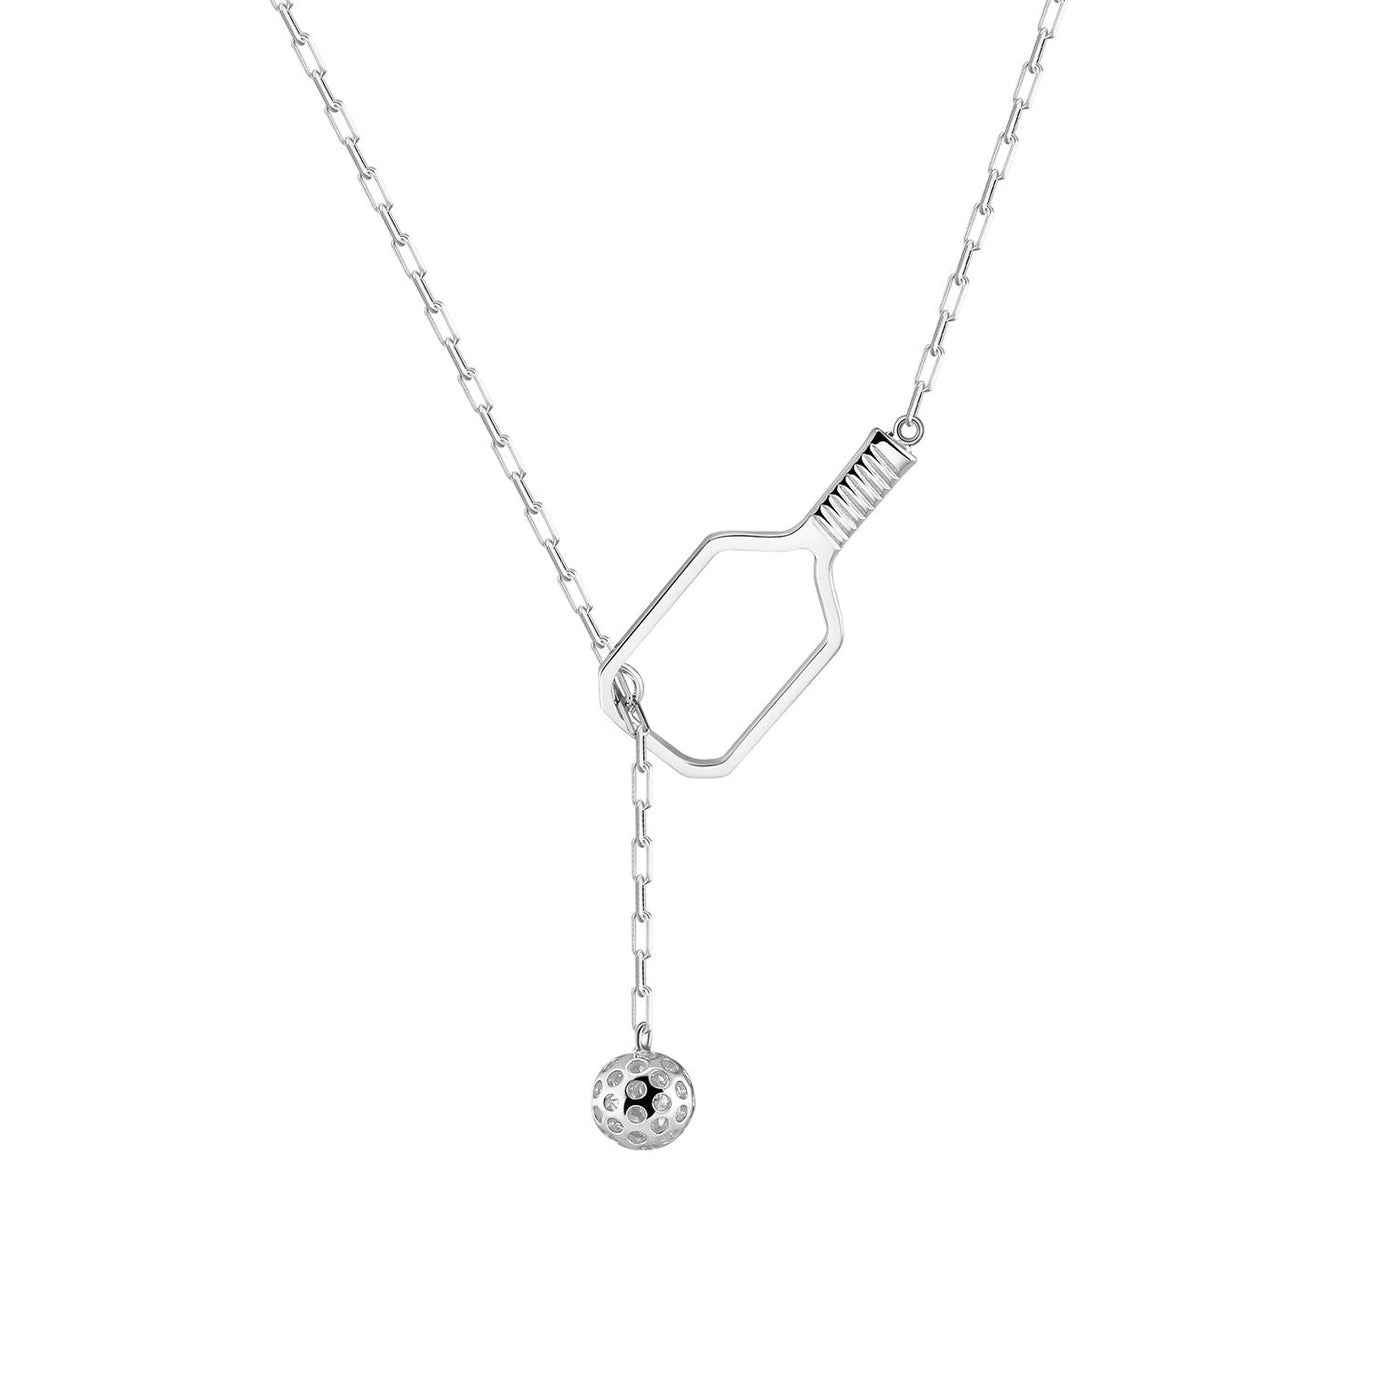 pickleball lariat necklace, silver lariat necklace, pickleball jewelry, pickle ball jewelry, pickleball jewelry, pickleball necklace, best pickleball gifts, pickleball for women